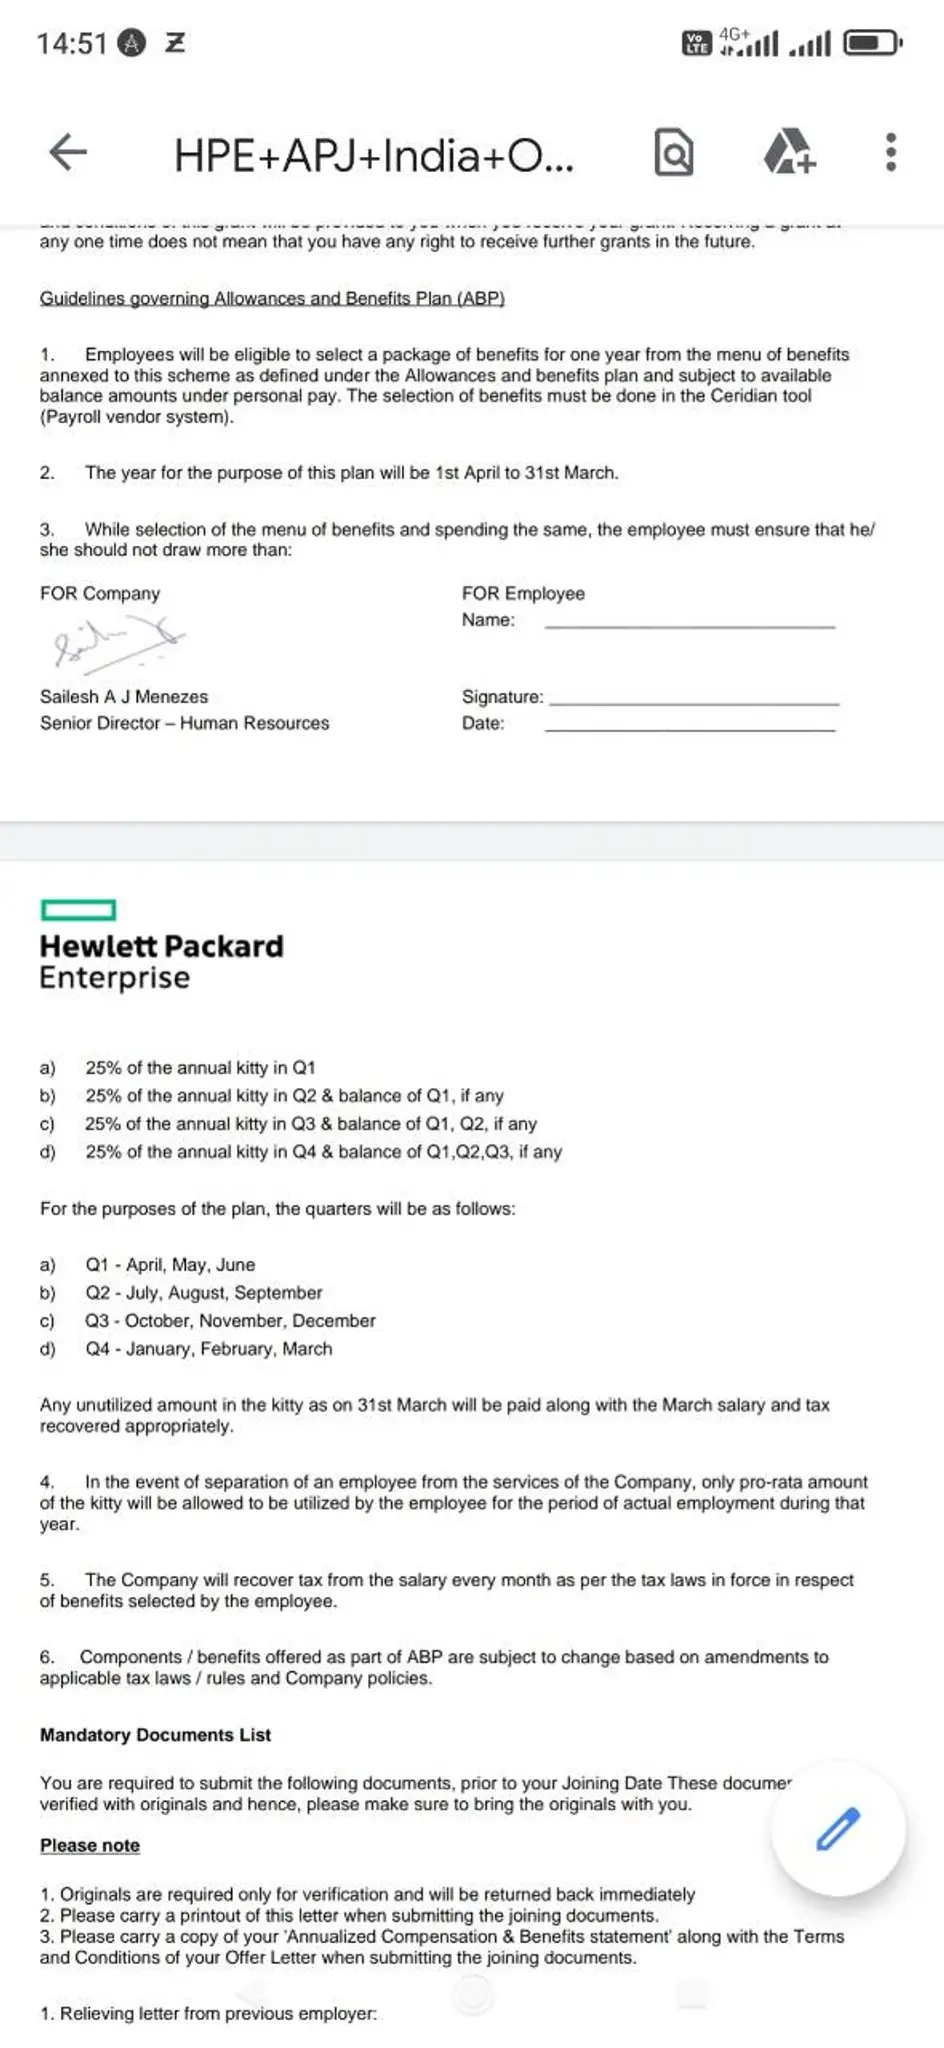 business operations analyst ii salary hewlett packard enterprise - What is the salary of business operations analyst in HP